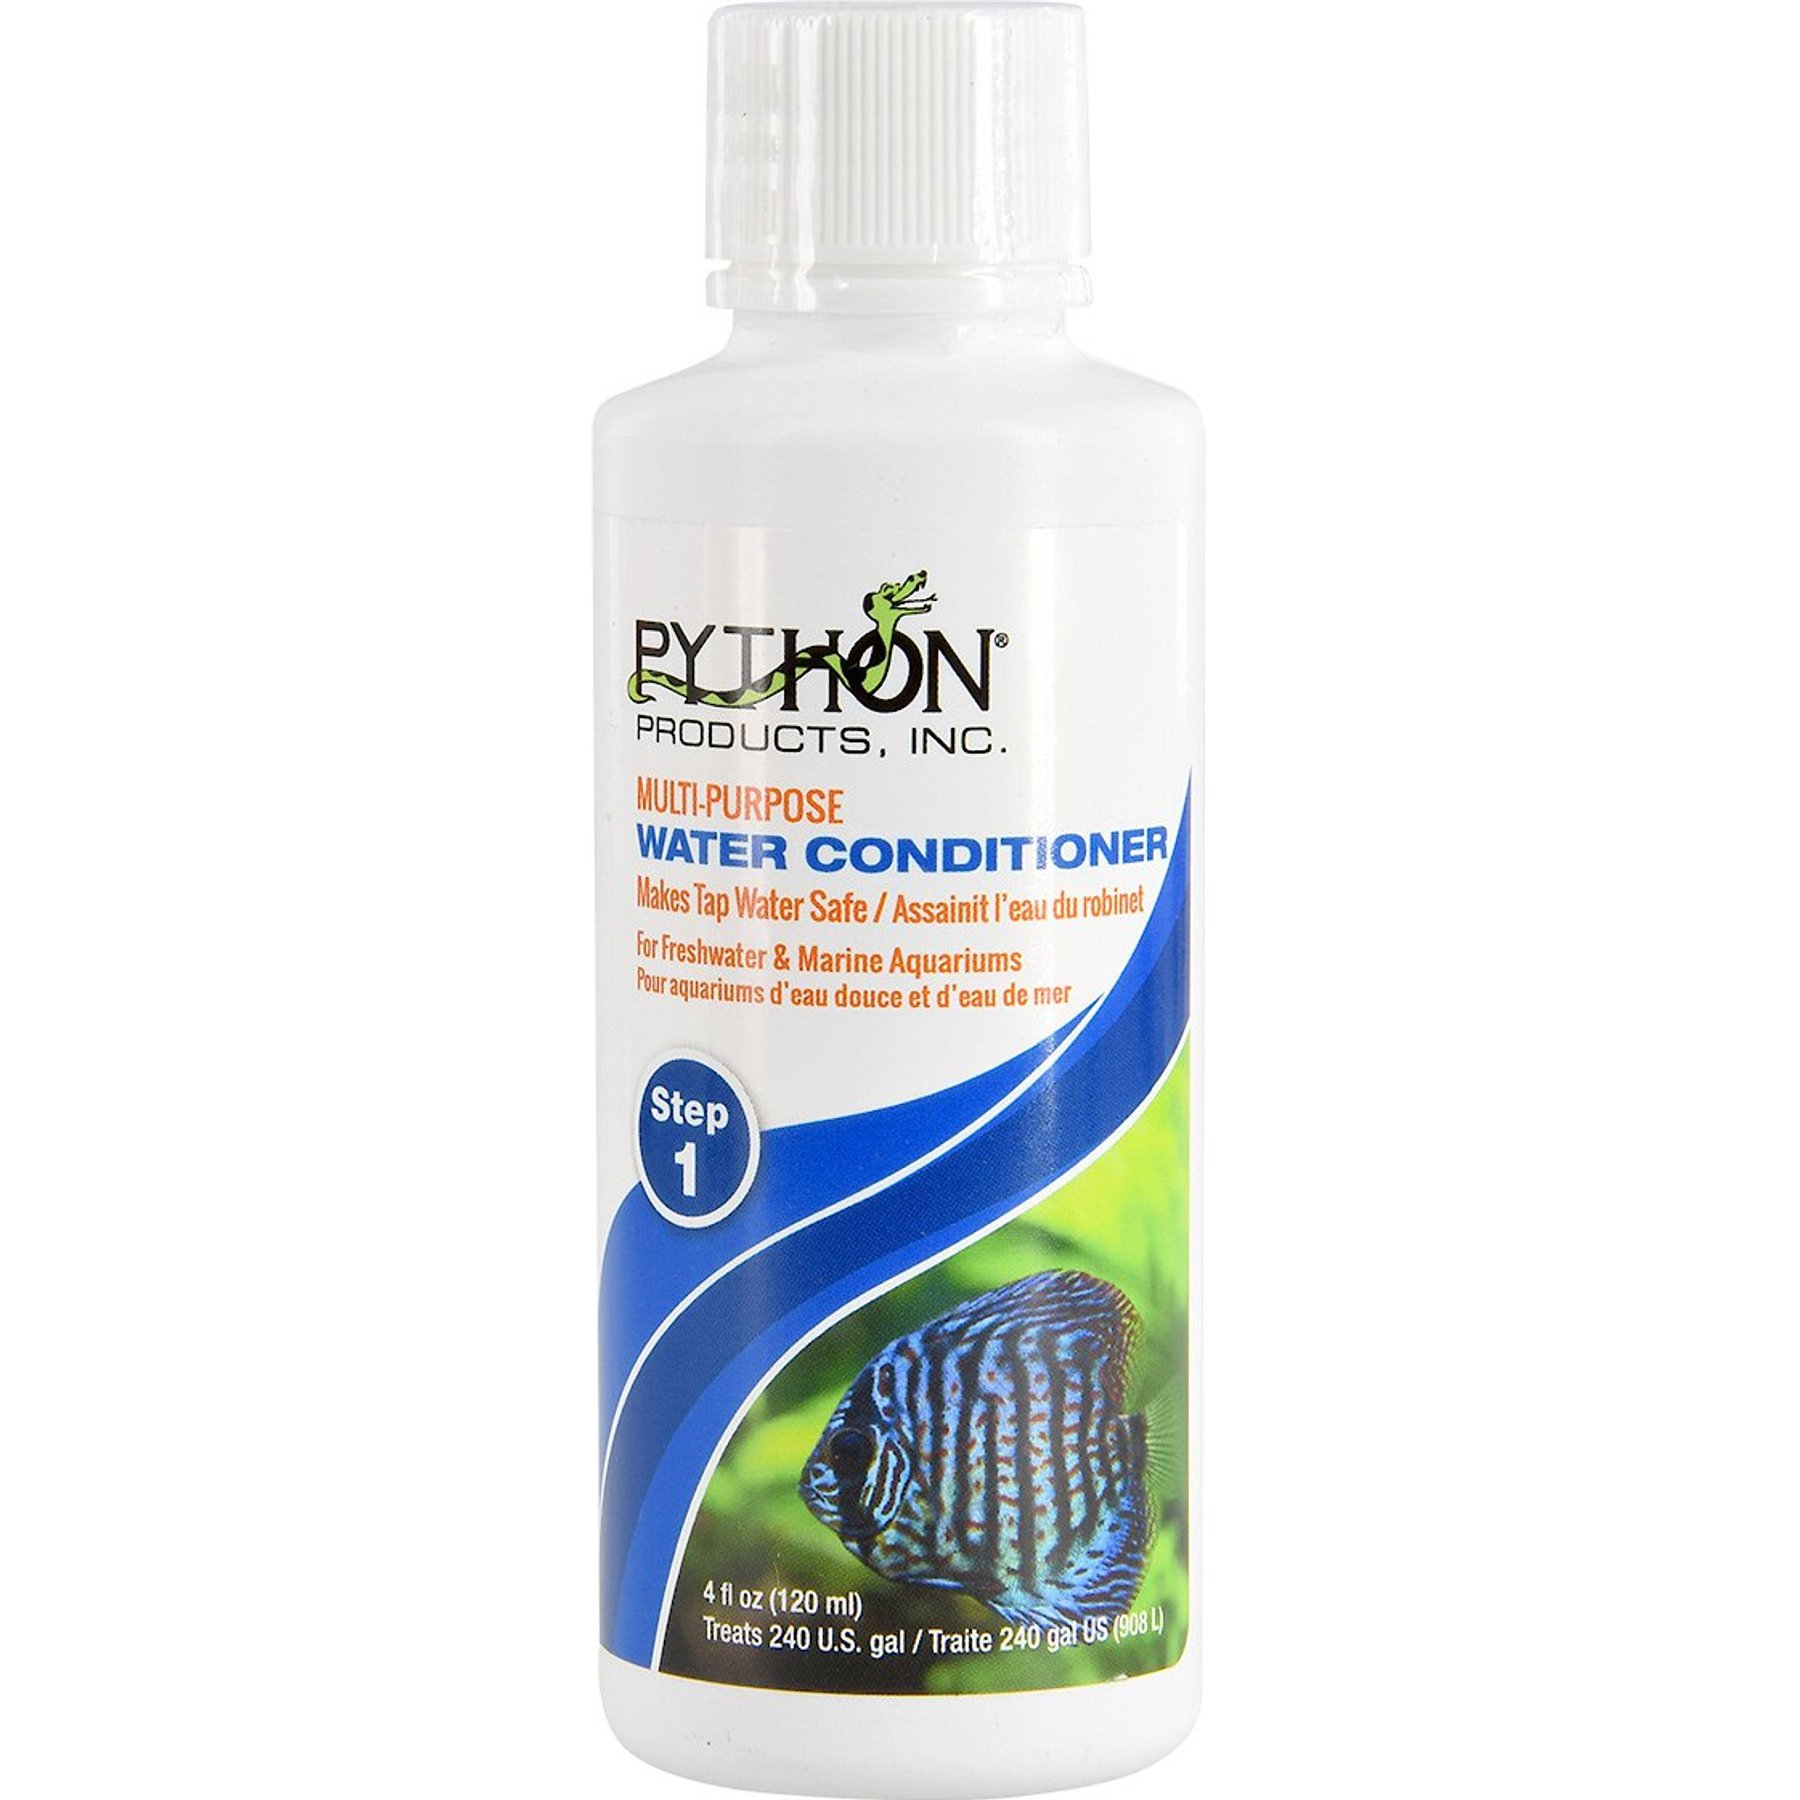 AQUASAFE POND WATER CONDITIONER - My Pet Store and More